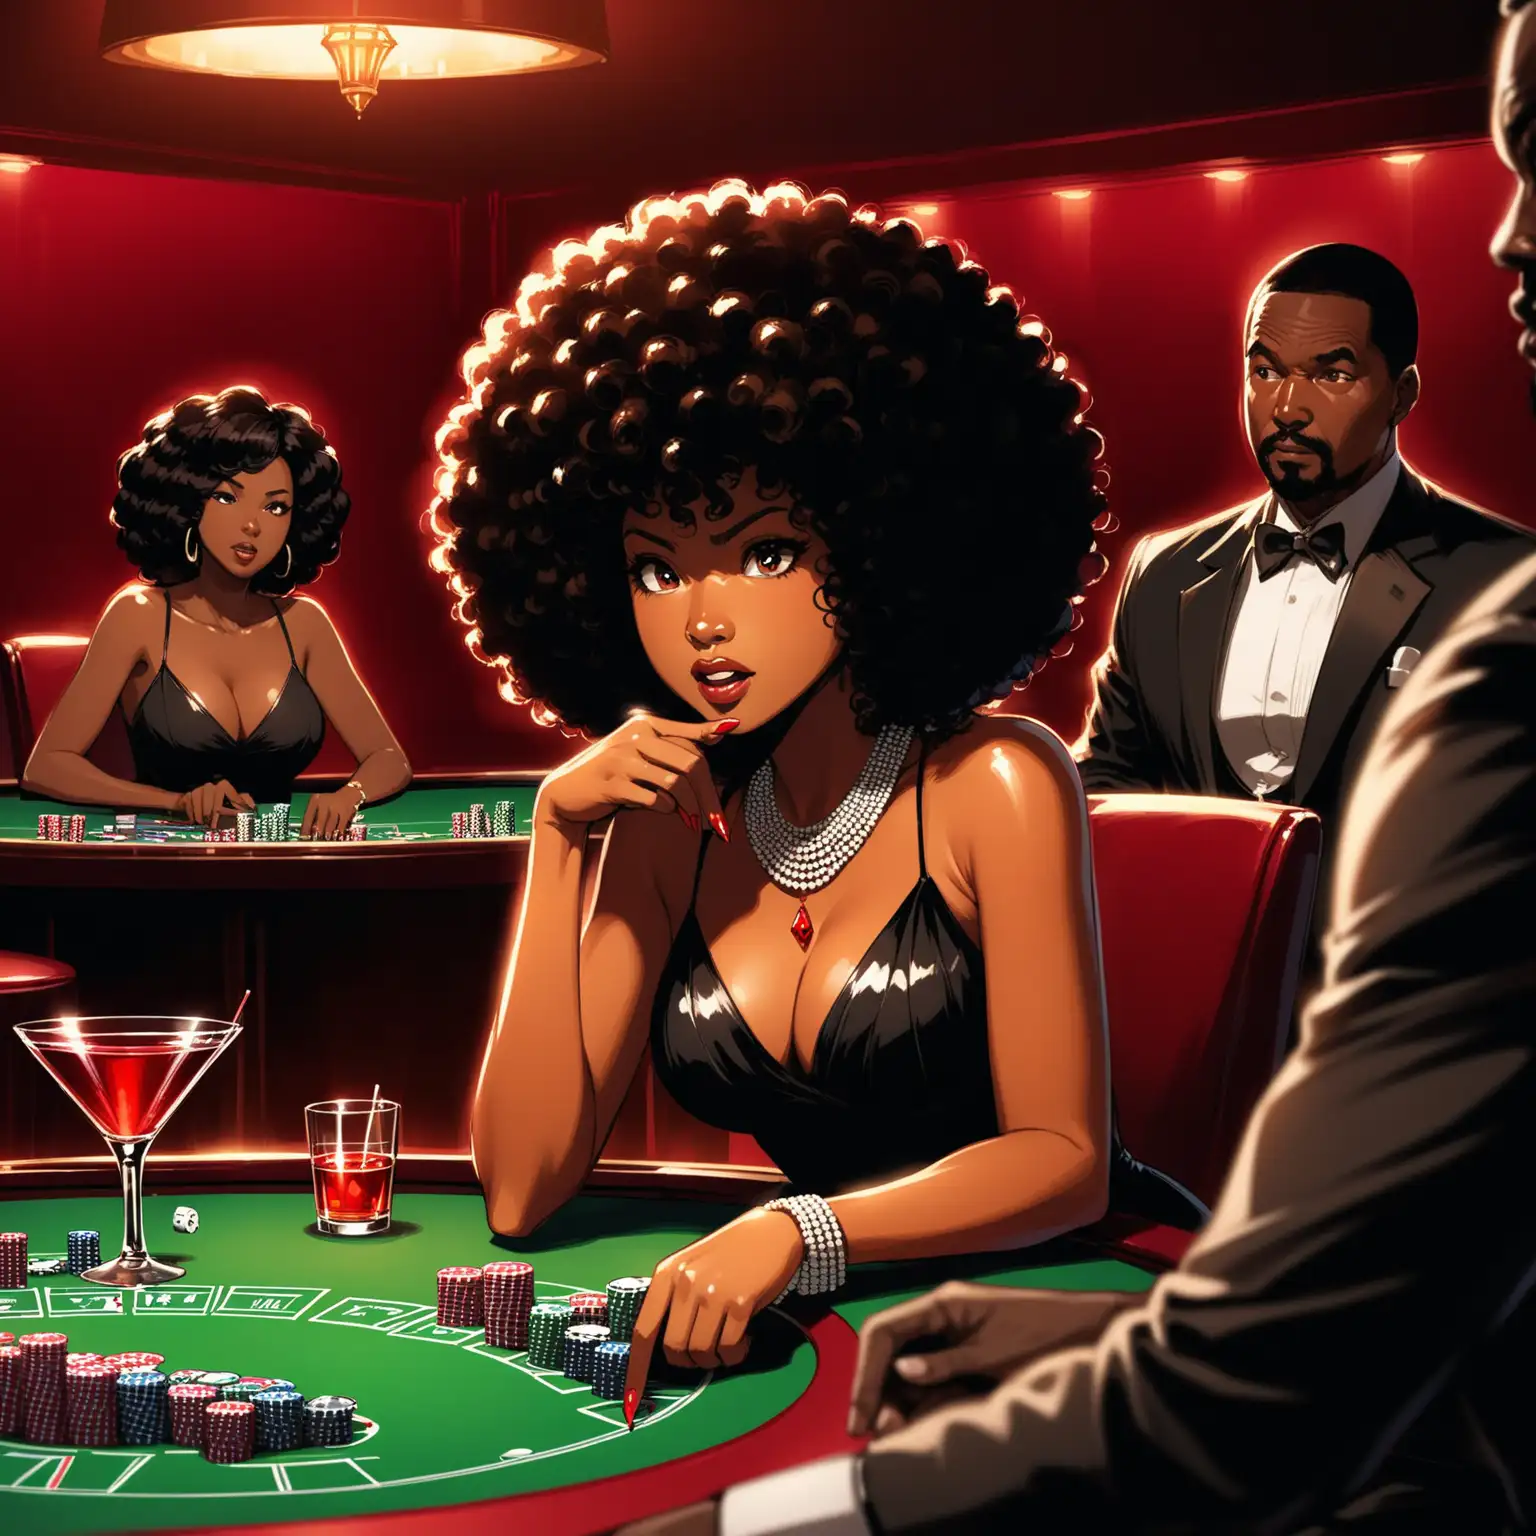 A dim room with red lights. It was once a speakeasy, now its a modernized lounge where the players play.  1 african american WOMAN with a big curly afro dressed in a black cocktail dress sits at the poker table and points a gun at the nervous asian man sitting at the table

